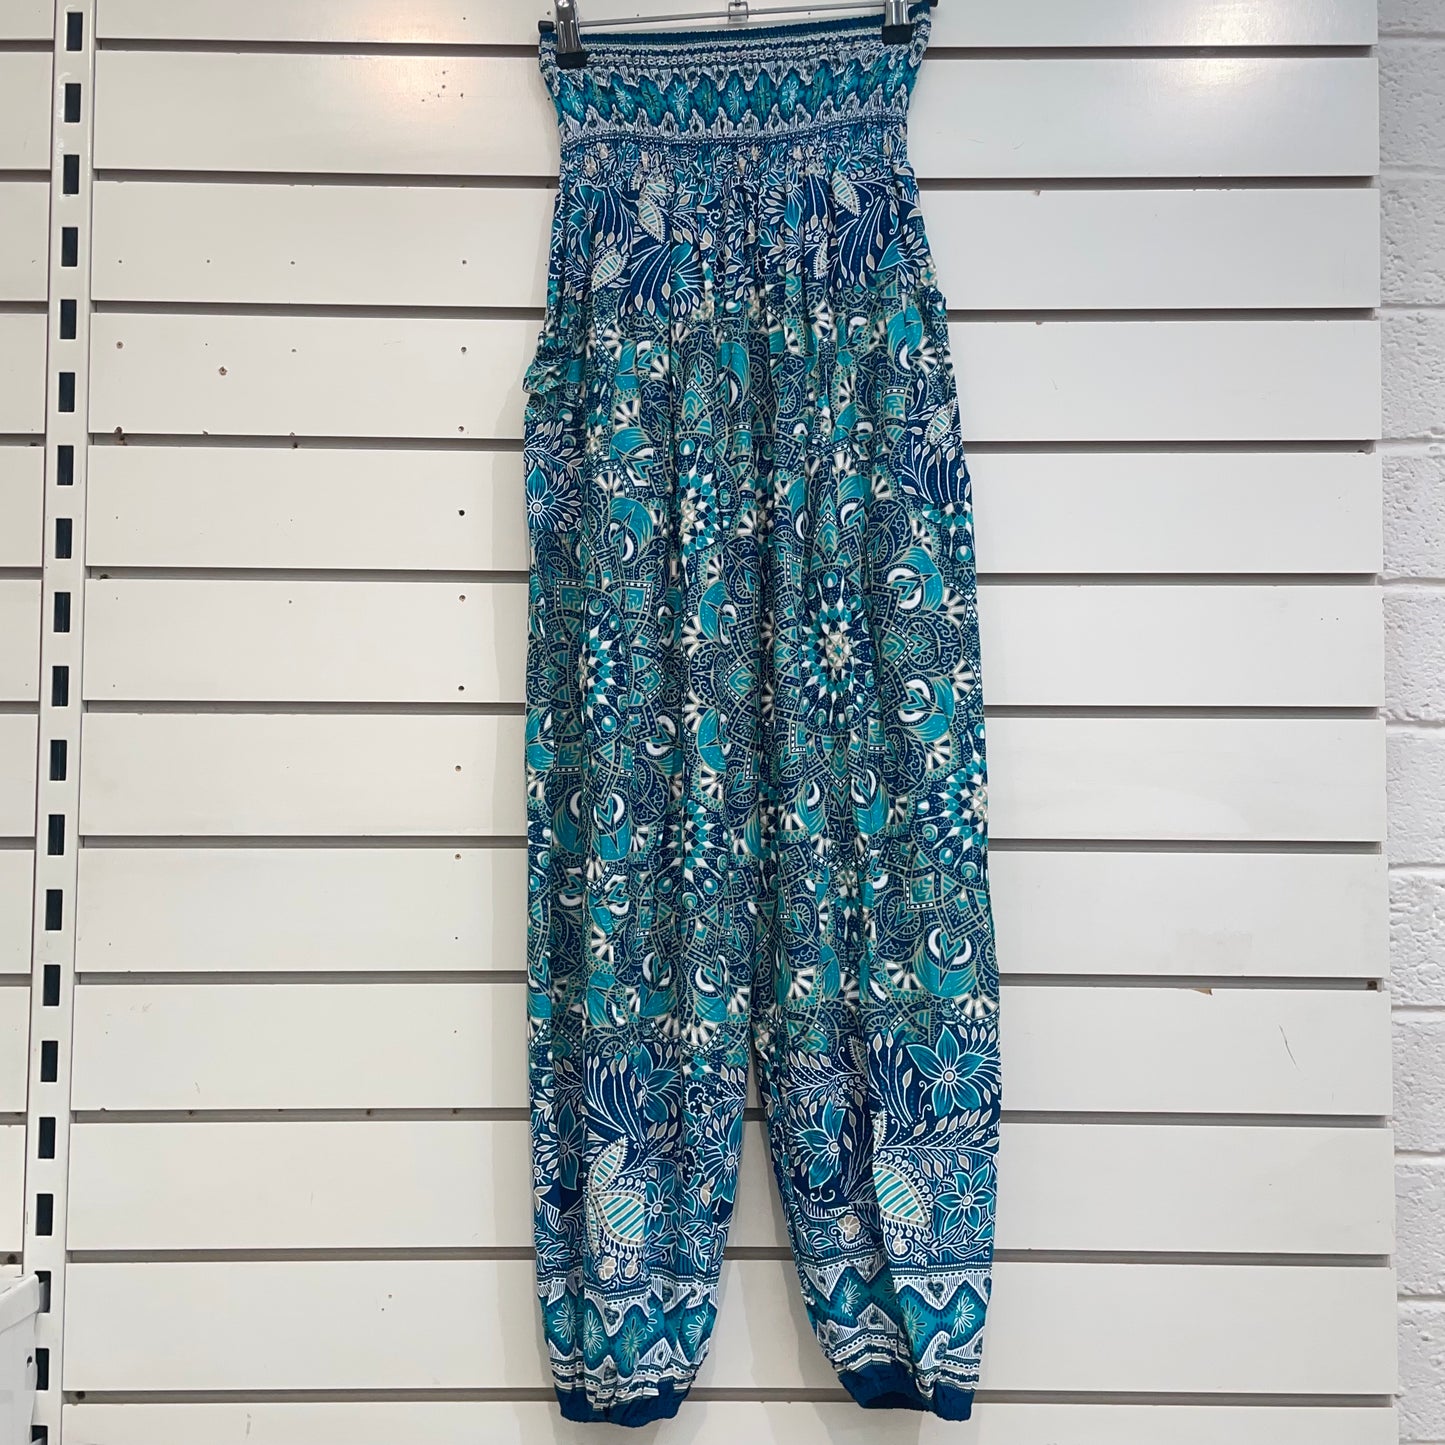 Teal Small Mandala and Flowers Patterned Pants